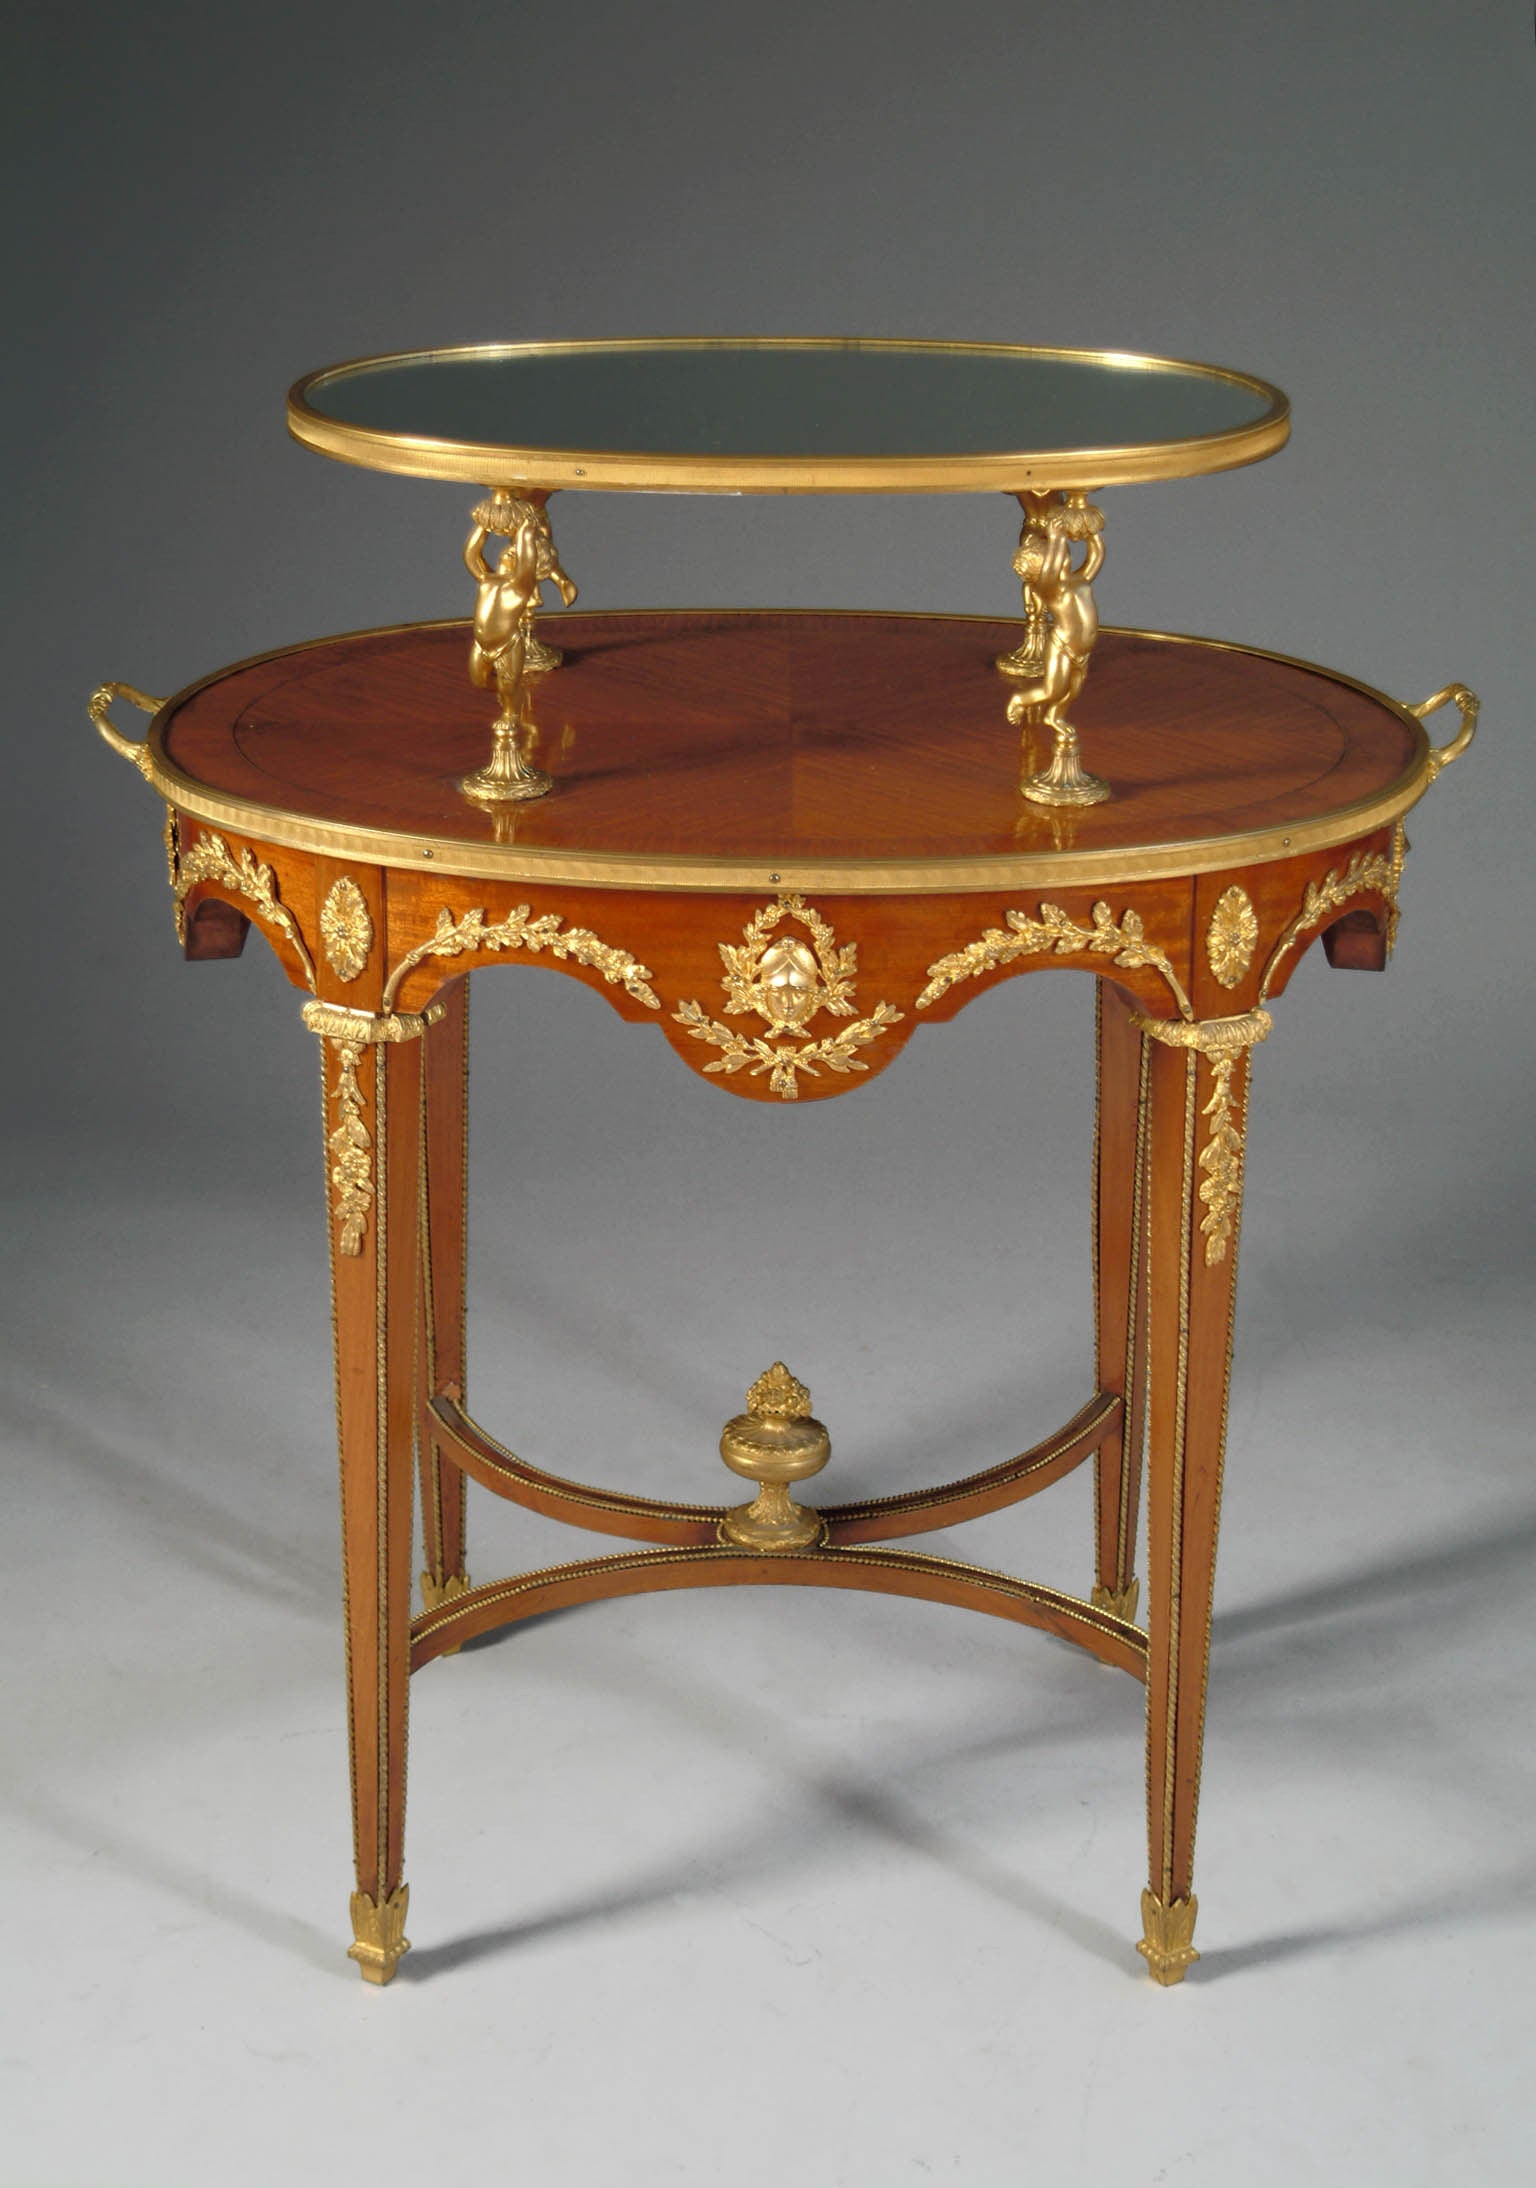 French Louis XVI Style Gilt Bronze-Mounted Two-Tier Pastry Table